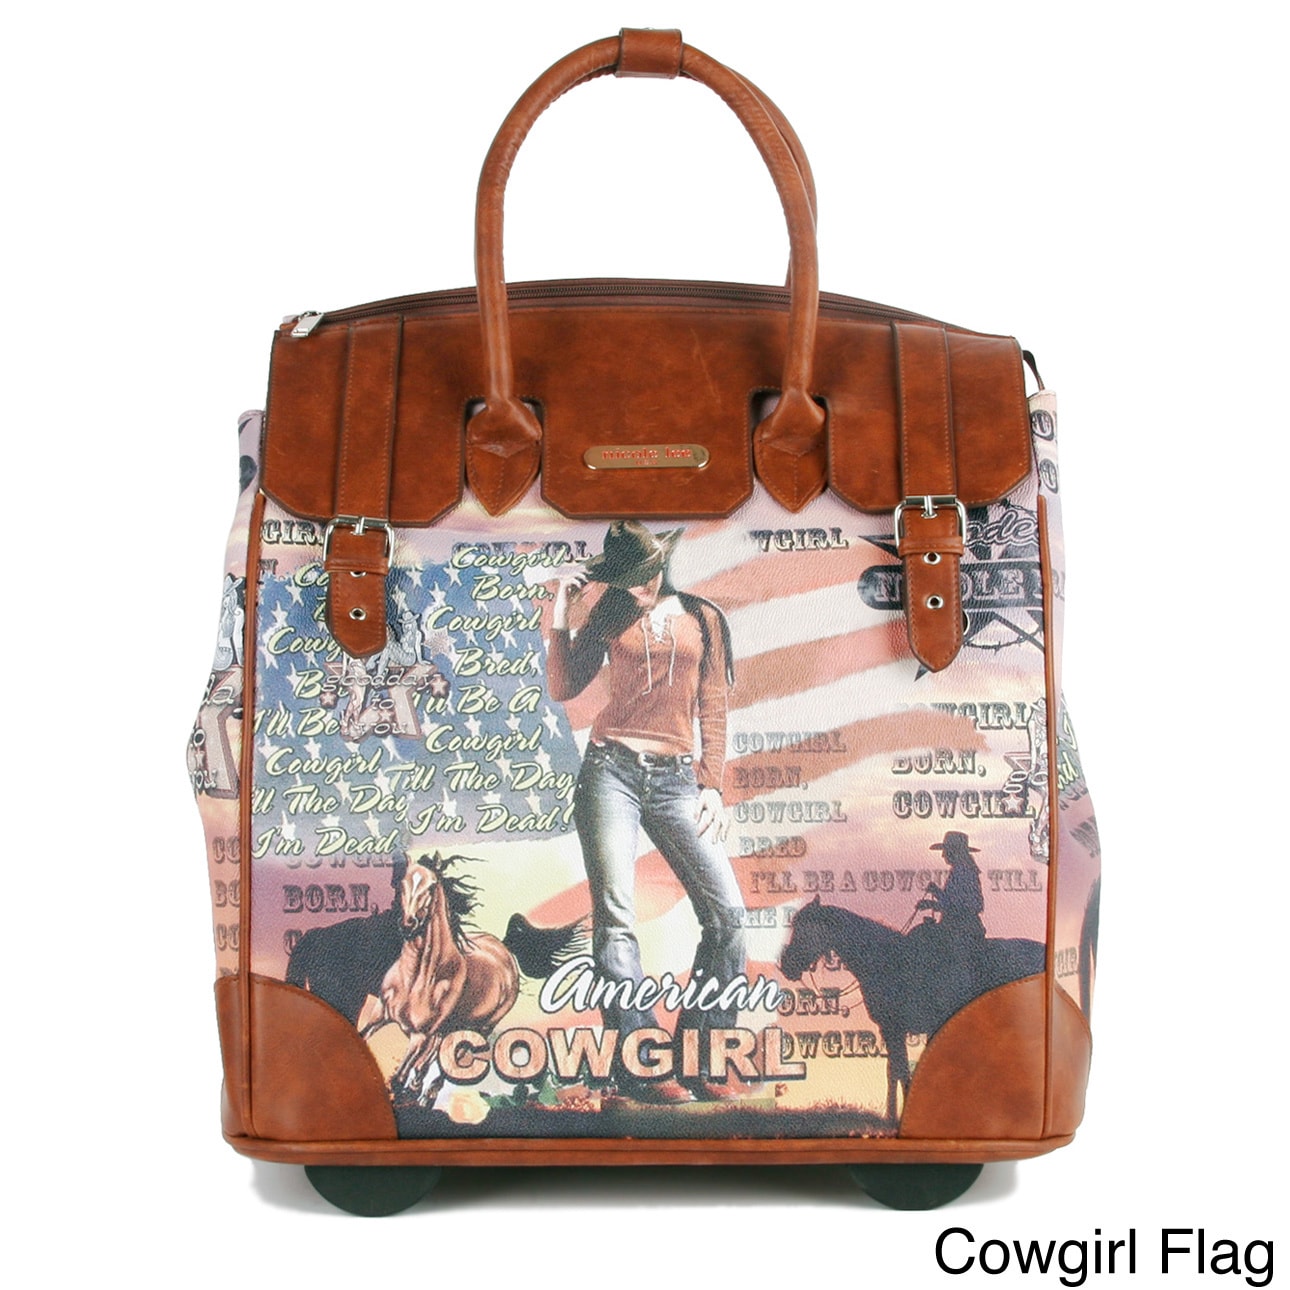 Nicole Lee Rolling Business Tote Special Print Edition